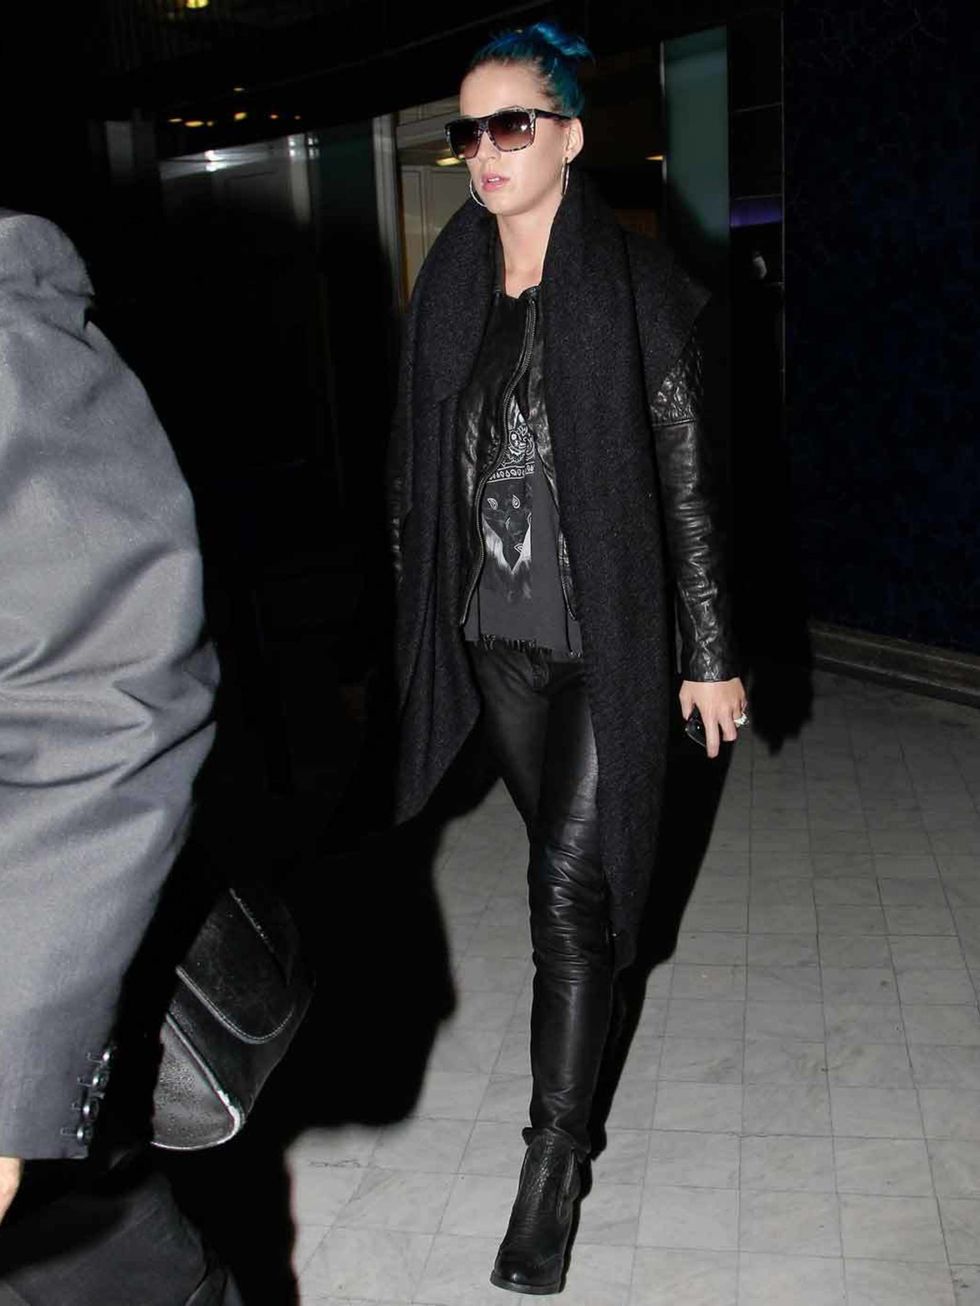 <p><a href="http://www.elleuk.com/star-style/celebrity-style-files/katy-perry">Katy Perry</a> channelling a rock chick look in head-to-toe All Saints</p>